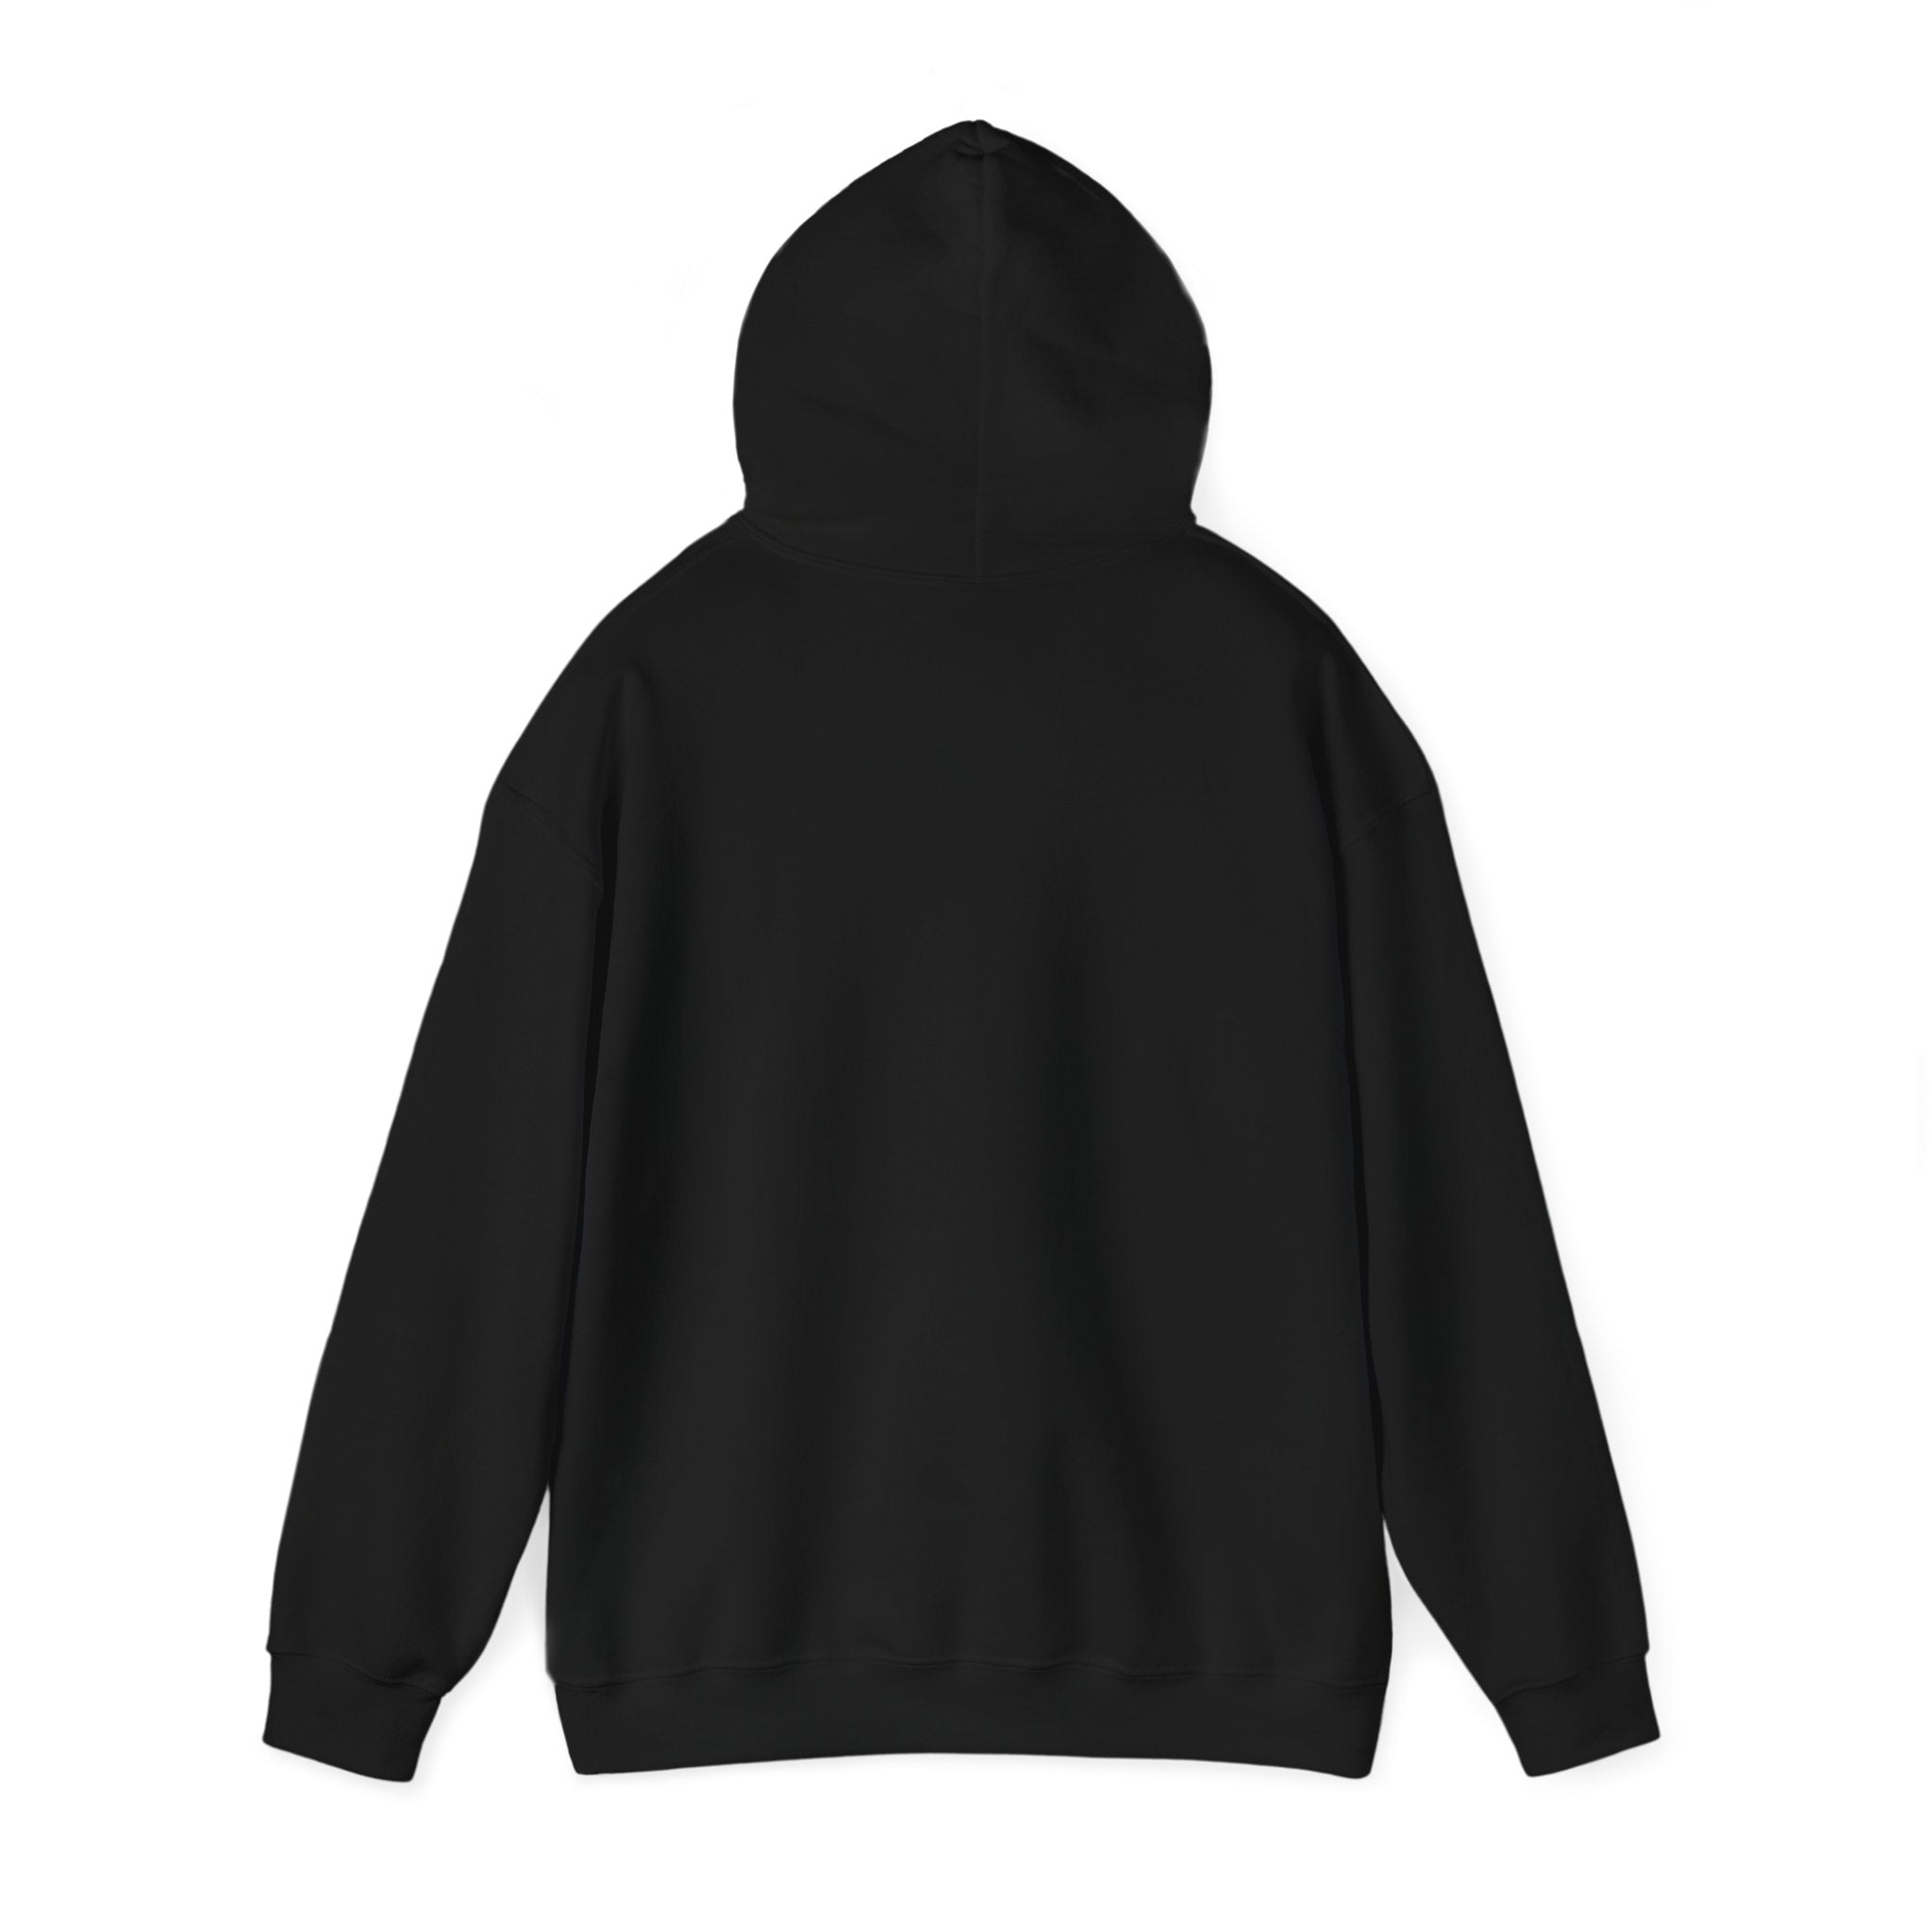 A plain black hoodie is shown from the back, featuring a hood and long sleeves. The design is simple and unadorned, yet fashion forward. This C-Ho-Co-La-Te - Hooded Sweatshirt effortlessly blends style and comfort.